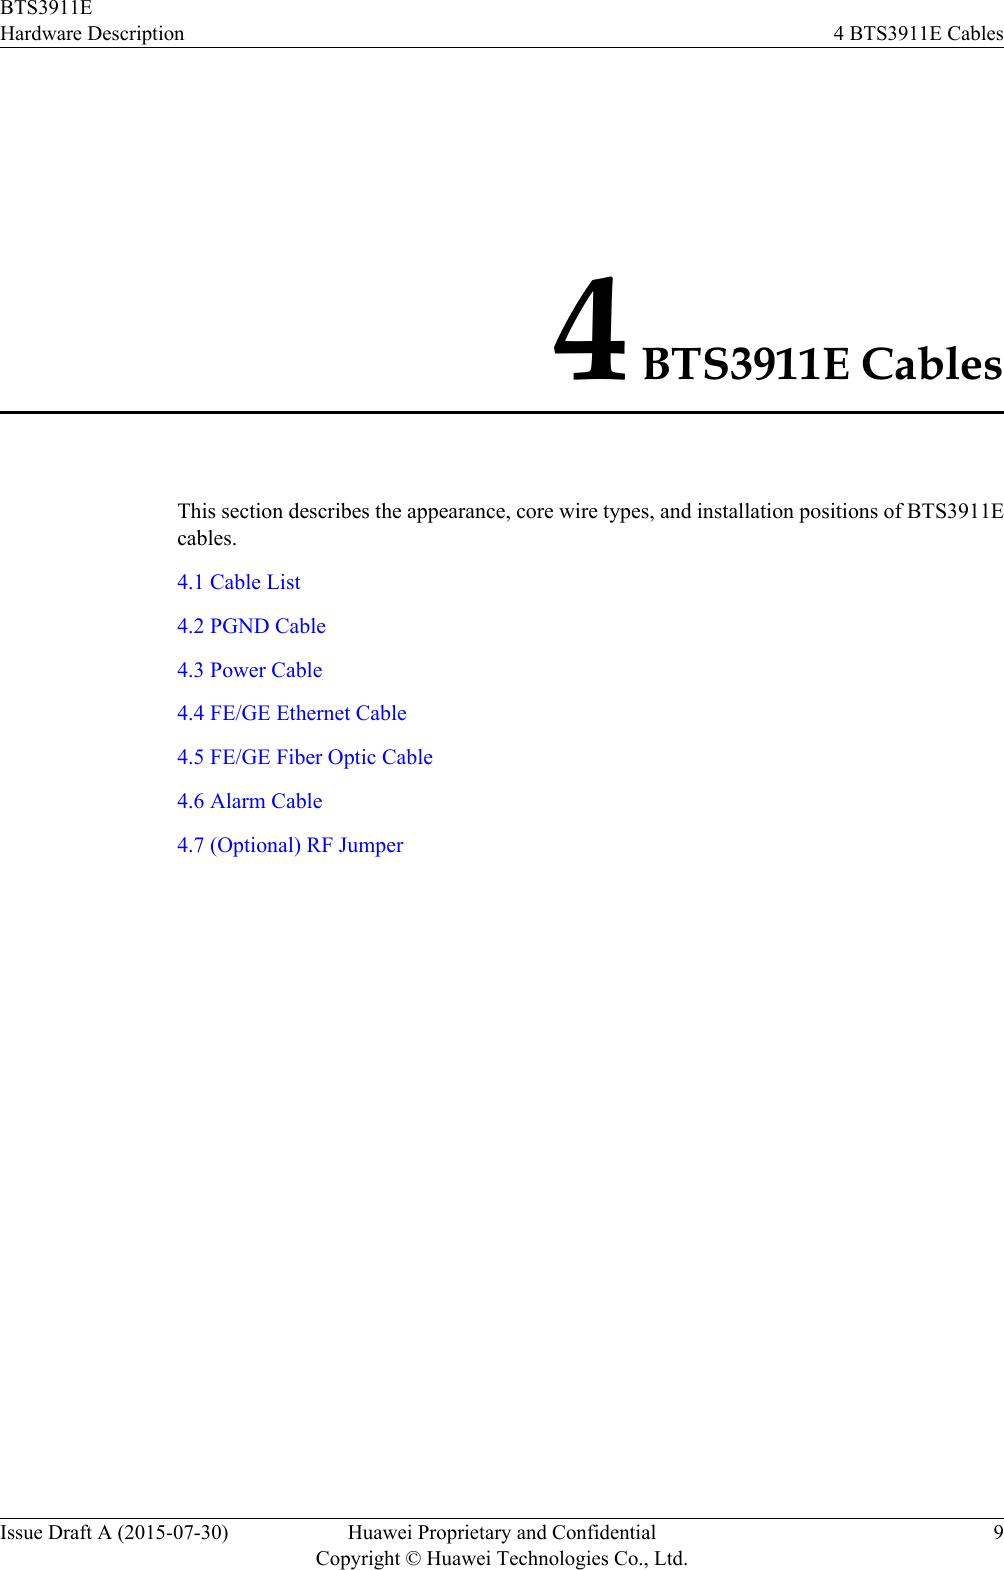 4 BTS3911E CablesThis section describes the appearance, core wire types, and installation positions of BTS3911Ecables.4.1 Cable List4.2 PGND Cable4.3 Power Cable4.4 FE/GE Ethernet Cable4.5 FE/GE Fiber Optic Cable4.6 Alarm Cable4.7 (Optional) RF JumperBTS3911EHardware Description 4 BTS3911E CablesIssue Draft A (2015-07-30) Huawei Proprietary and ConfidentialCopyright © Huawei Technologies Co., Ltd.9